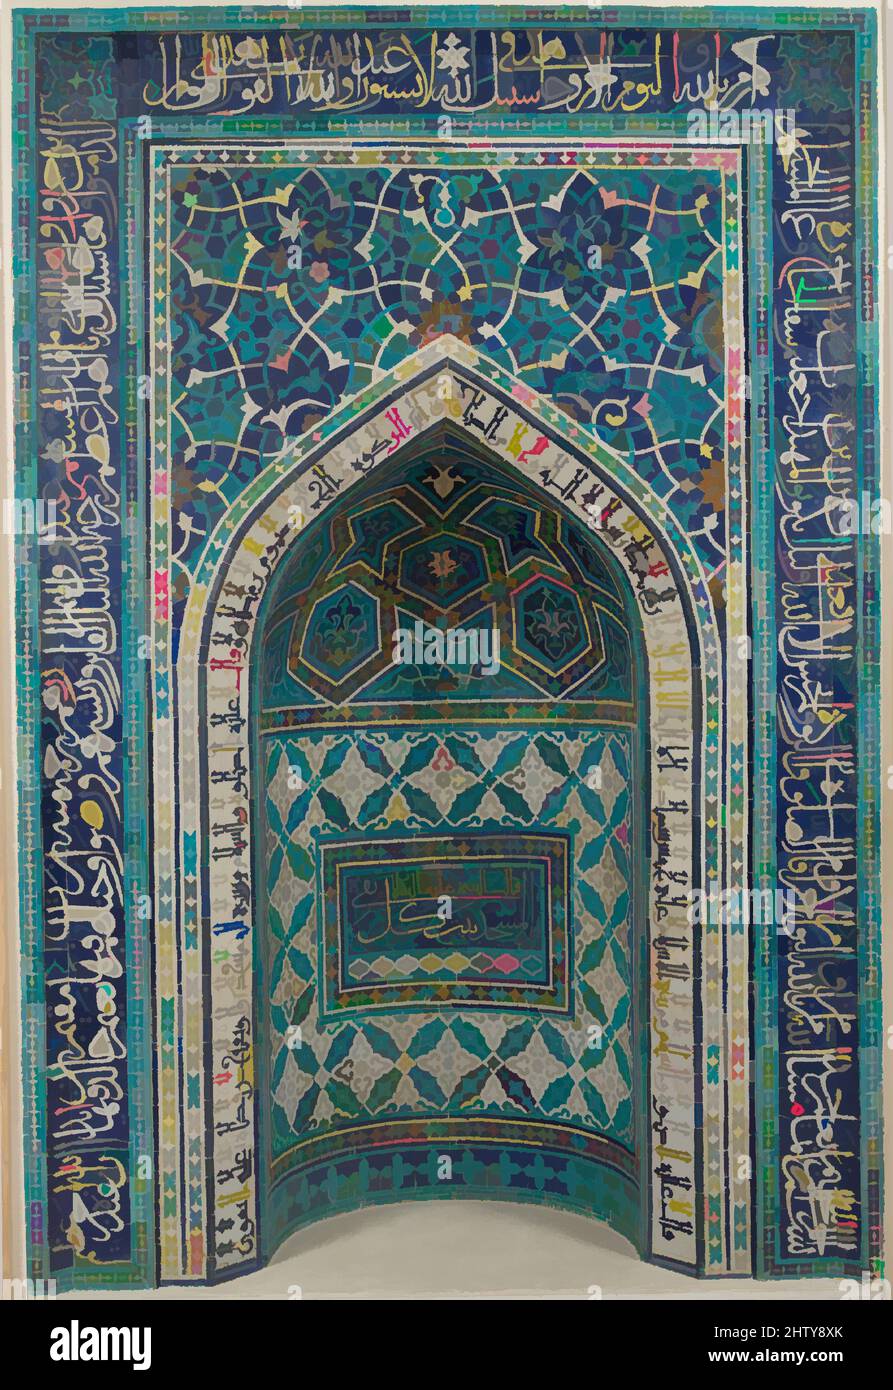 Art inspired by Mihrab (Prayer Niche), A.H. 755/A.D. 1354–55, From Iran, Isfahan, Mosaic of polychrome-glazed cut tiles on stonepaste body; set into mortar, 135 1/16 x 113 11/16in. (343.1 x 288.7cm), Ceramics, Arabic Inscription (on the outer border in thuluth script) Qur'an 9:18-22, Classic works modernized by Artotop with a splash of modernity. Shapes, color and value, eye-catching visual impact on art. Emotions through freedom of artworks in a contemporary way. A timeless message pursuing a wildly creative new direction. Artists turning to the digital medium and creating the Artotop NFT Stock Photo